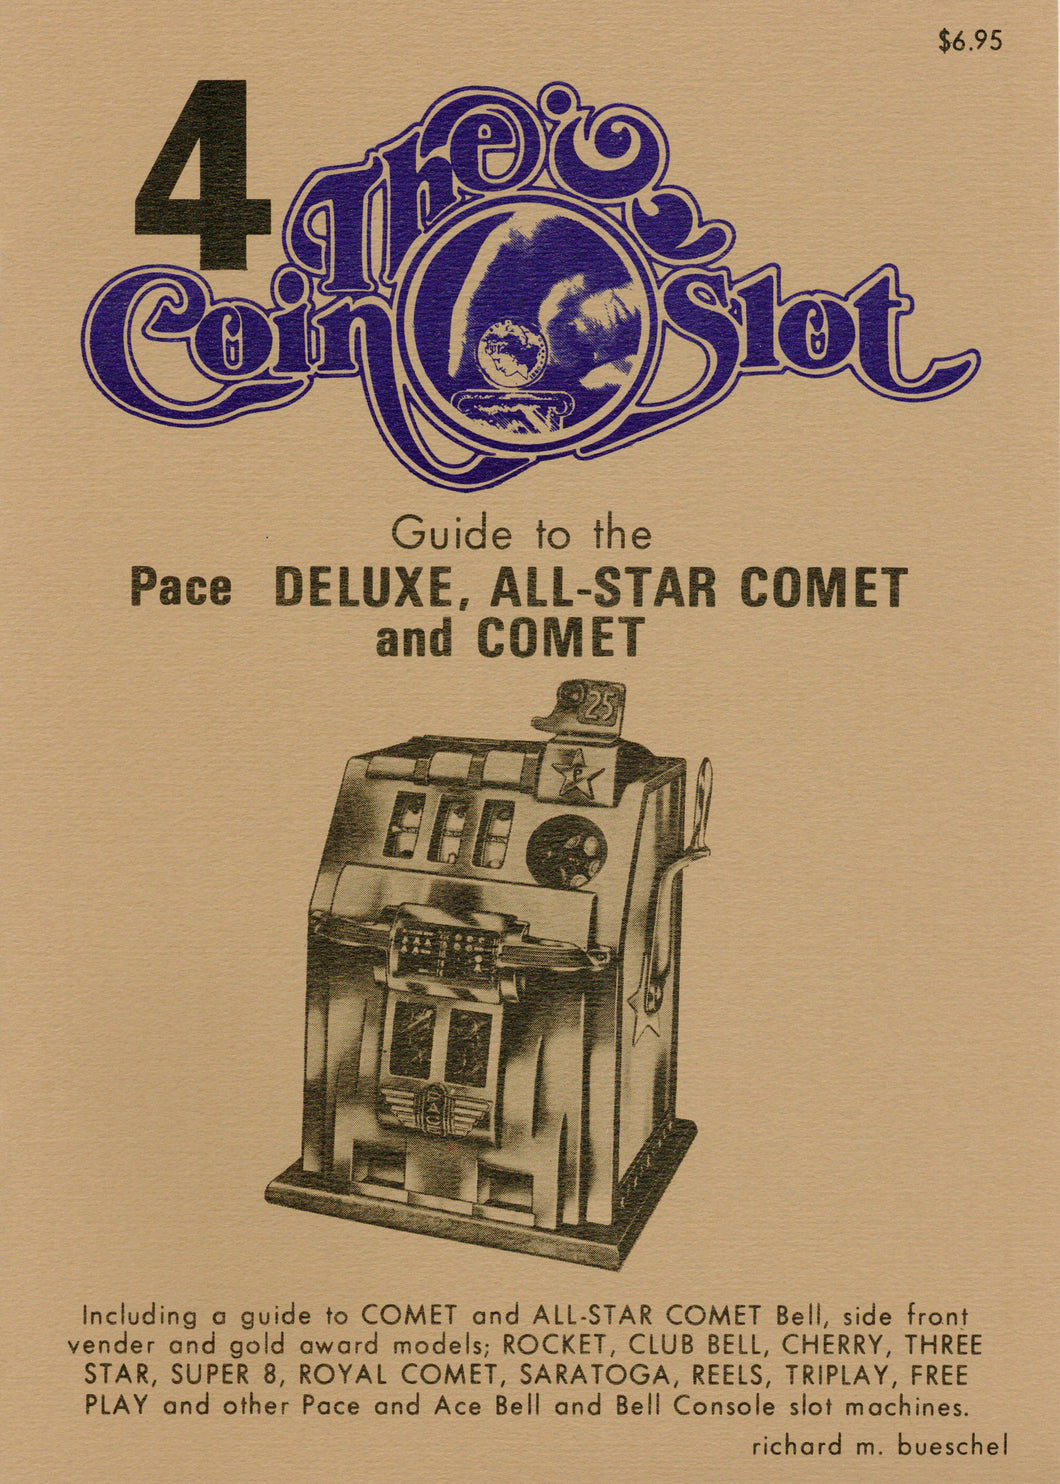 Coin Slot # 4. Guide to the Pace Deluxe, All-Star Comet and Comet (We may find one box more).